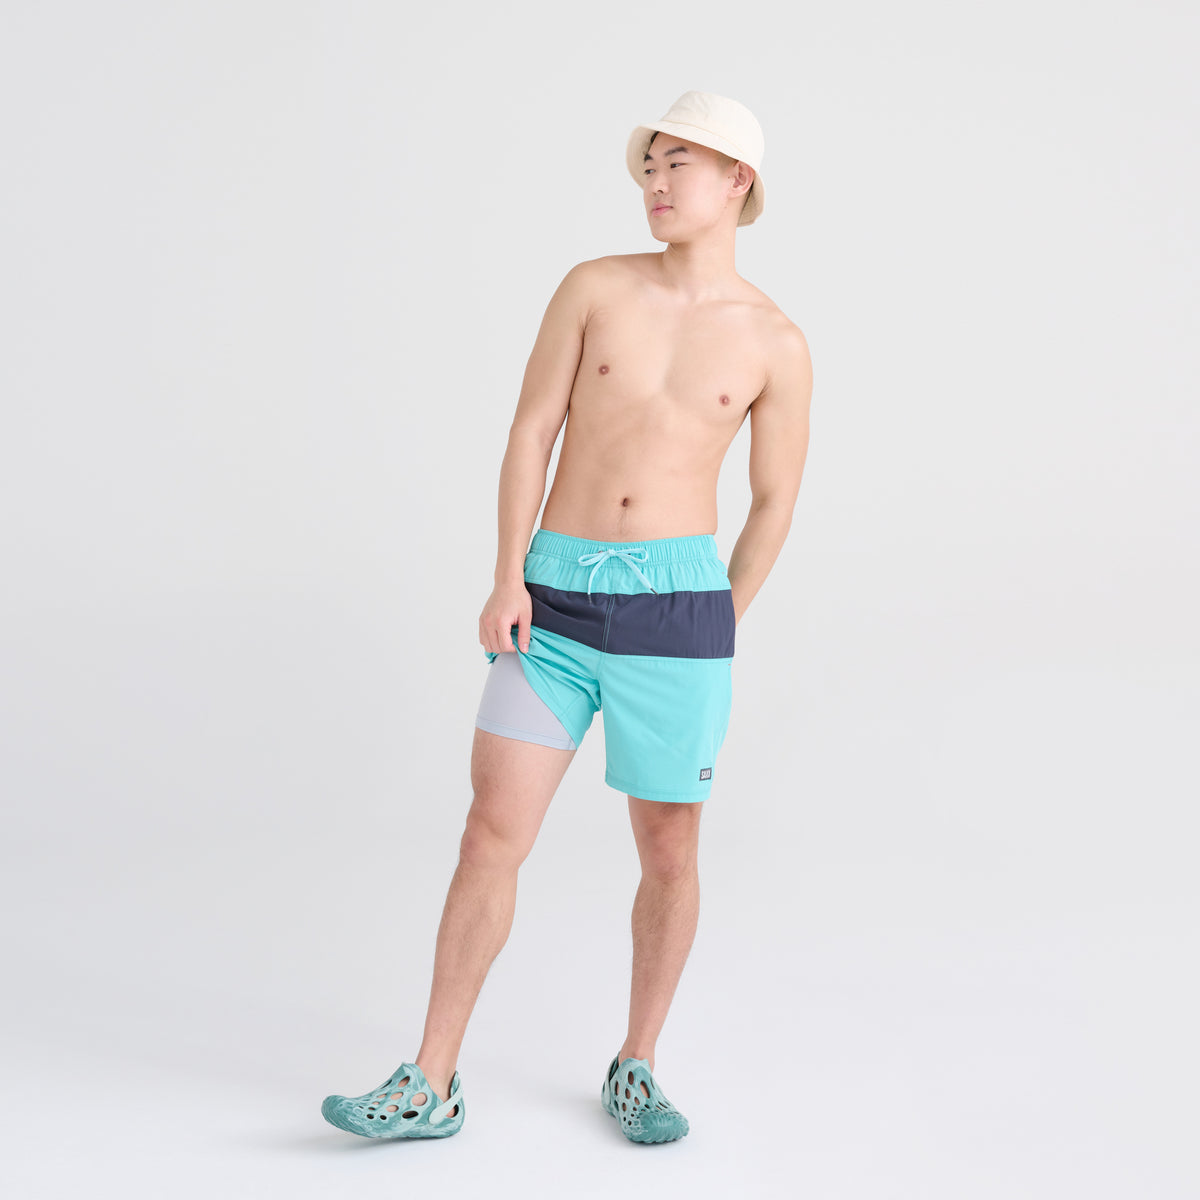 Saxx "Oh Bouy" Turquoise/India Ink Stretch Volley 7" Swim Shorts